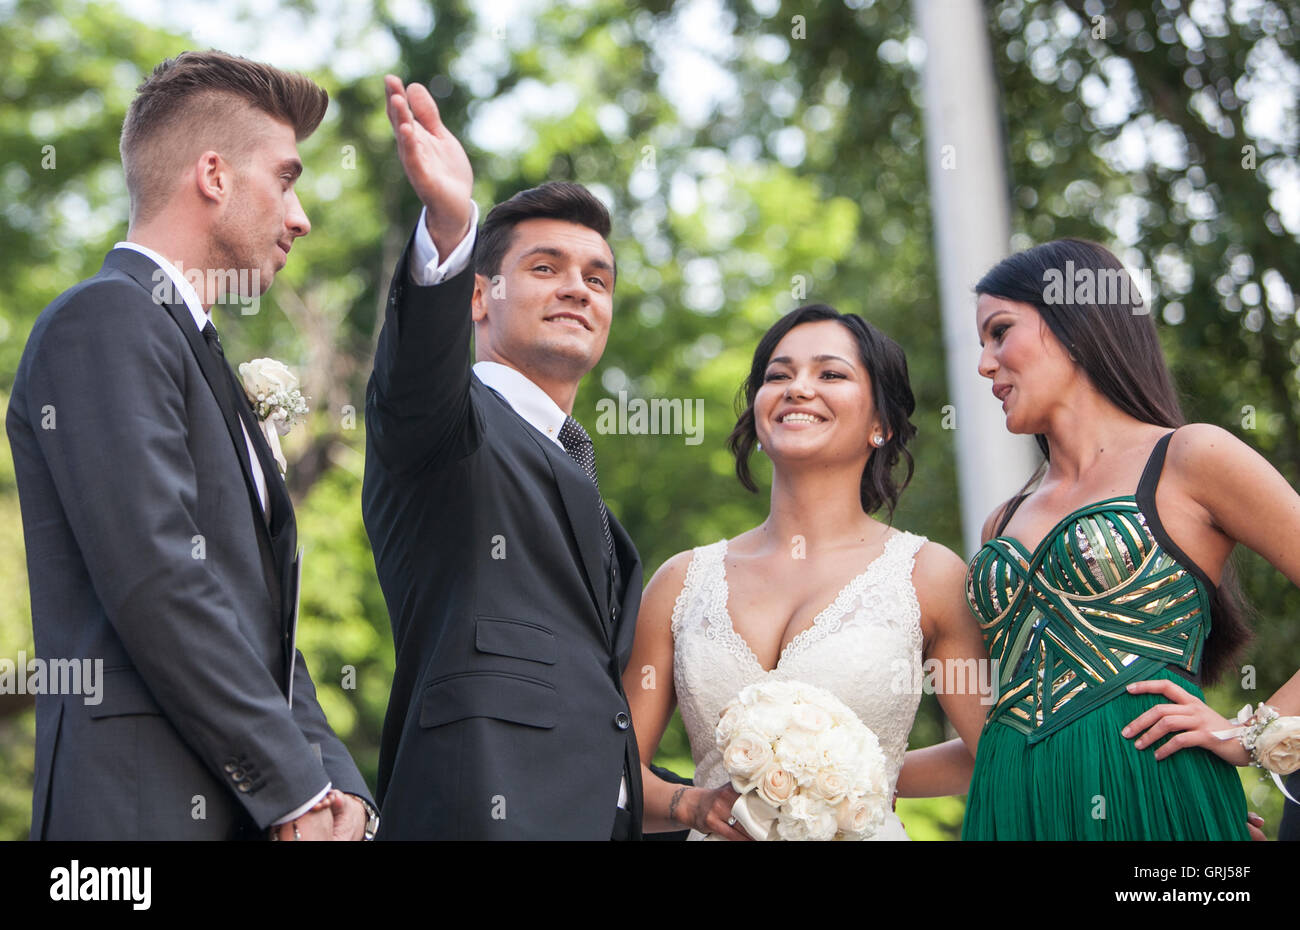 The wedding of Dejan Lovren and Anita Lovren at Church of Our Lady of Stock  Photo - Alamy